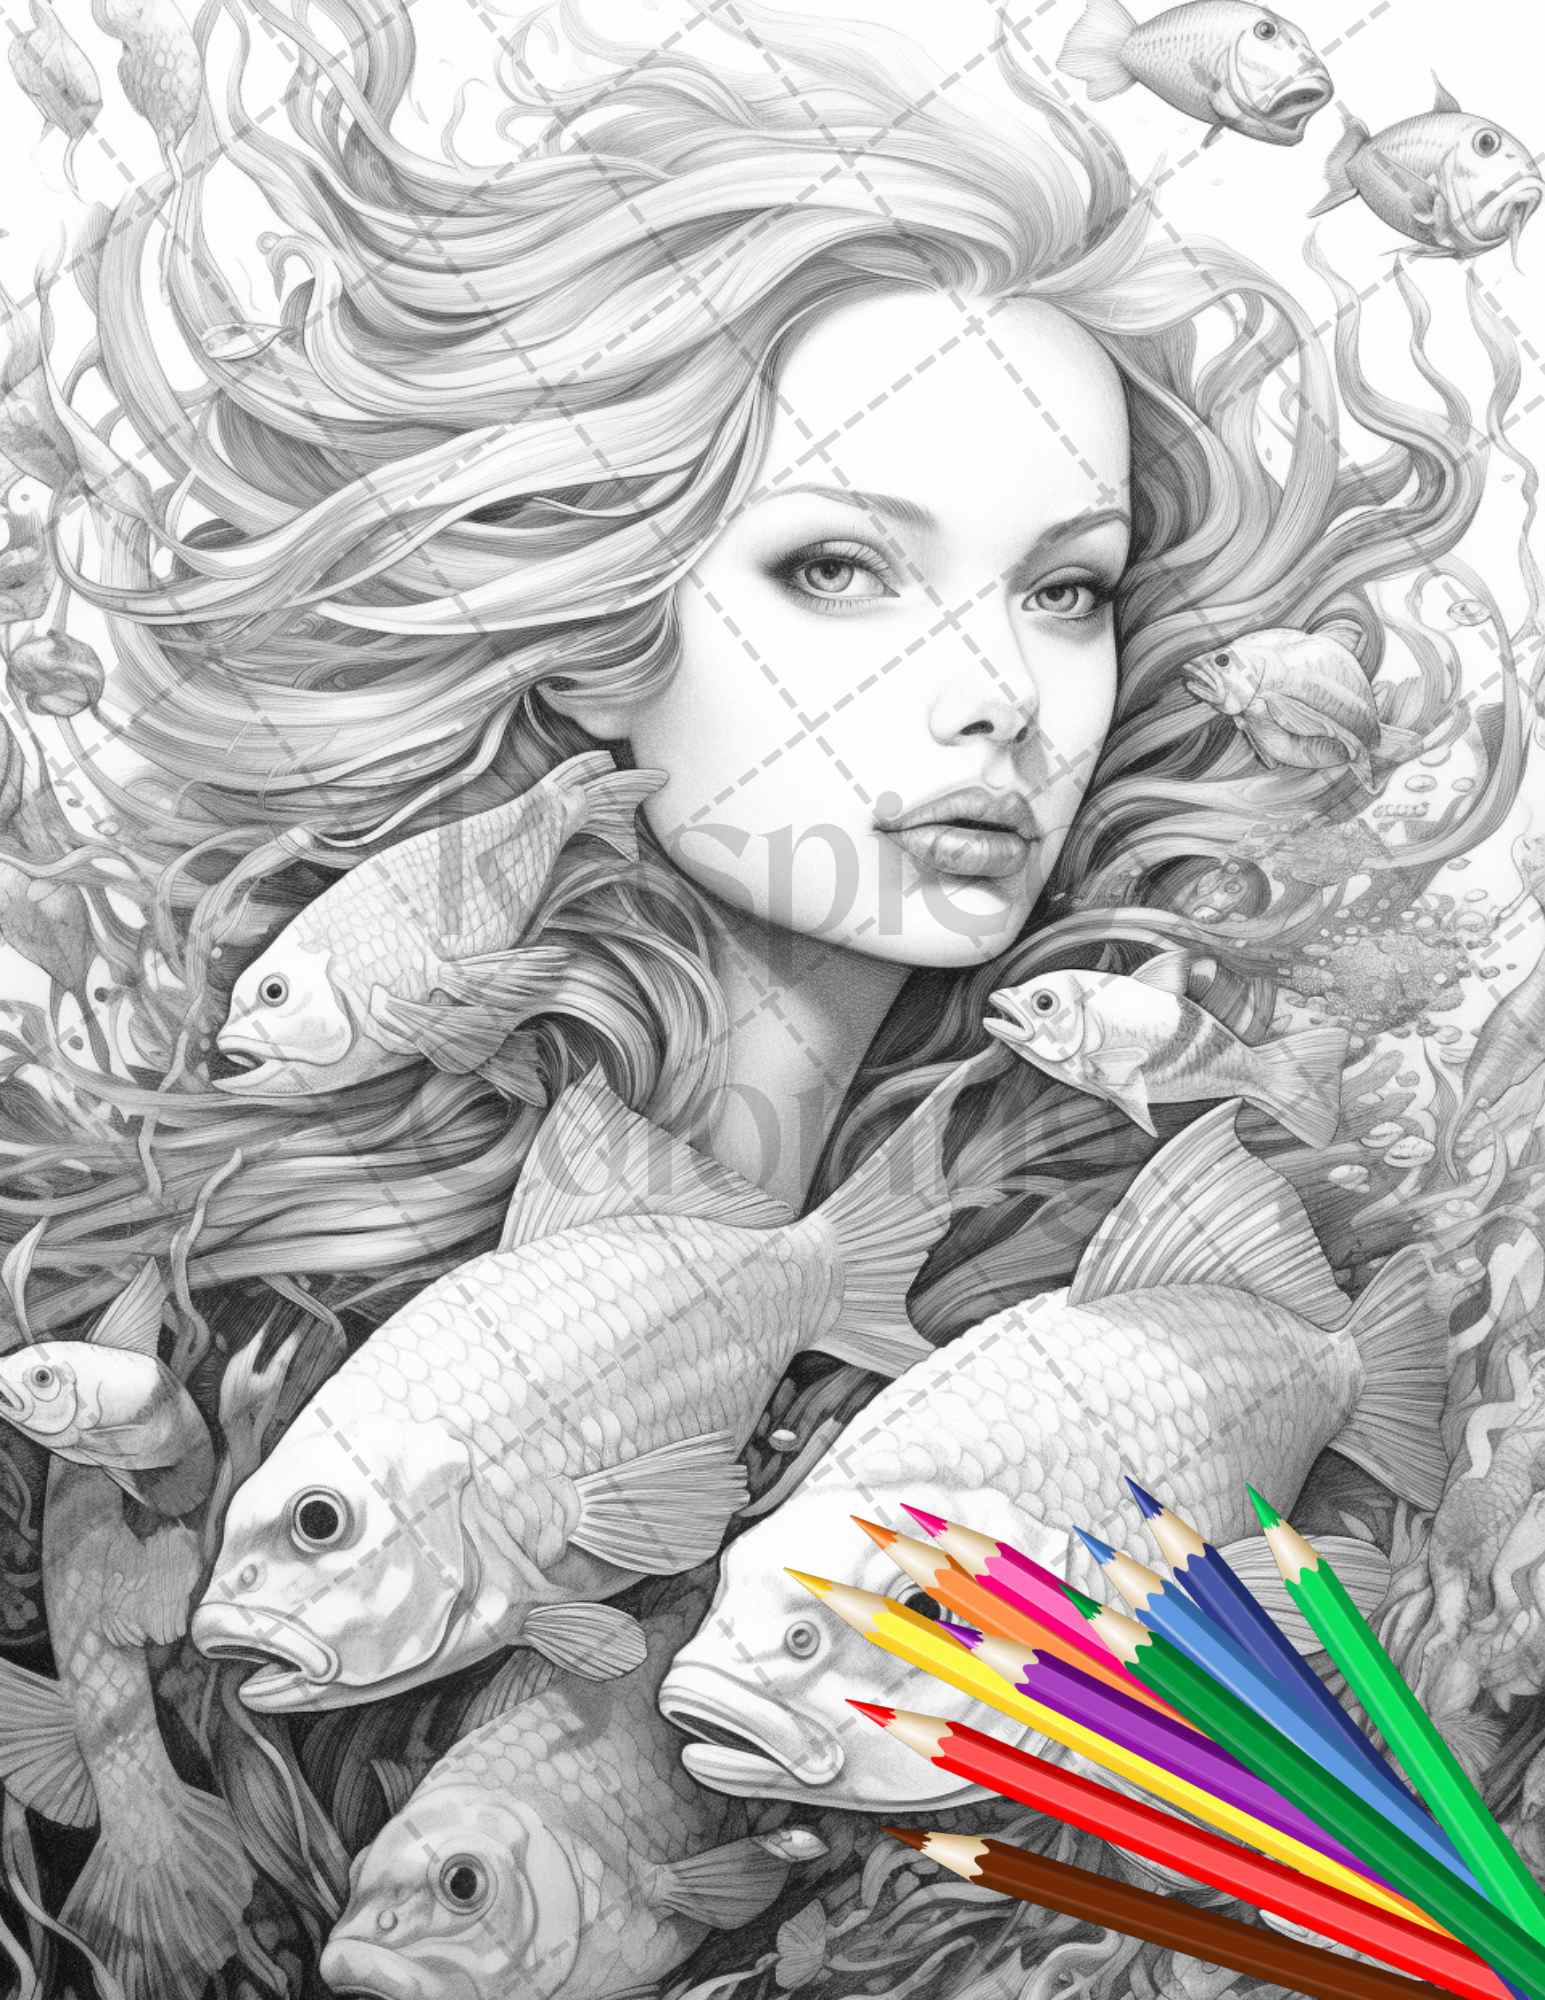 40 Enchanted Mermaid Grayscale Coloring Pages Printable for Adults, PDF File Instant Download - raspiee